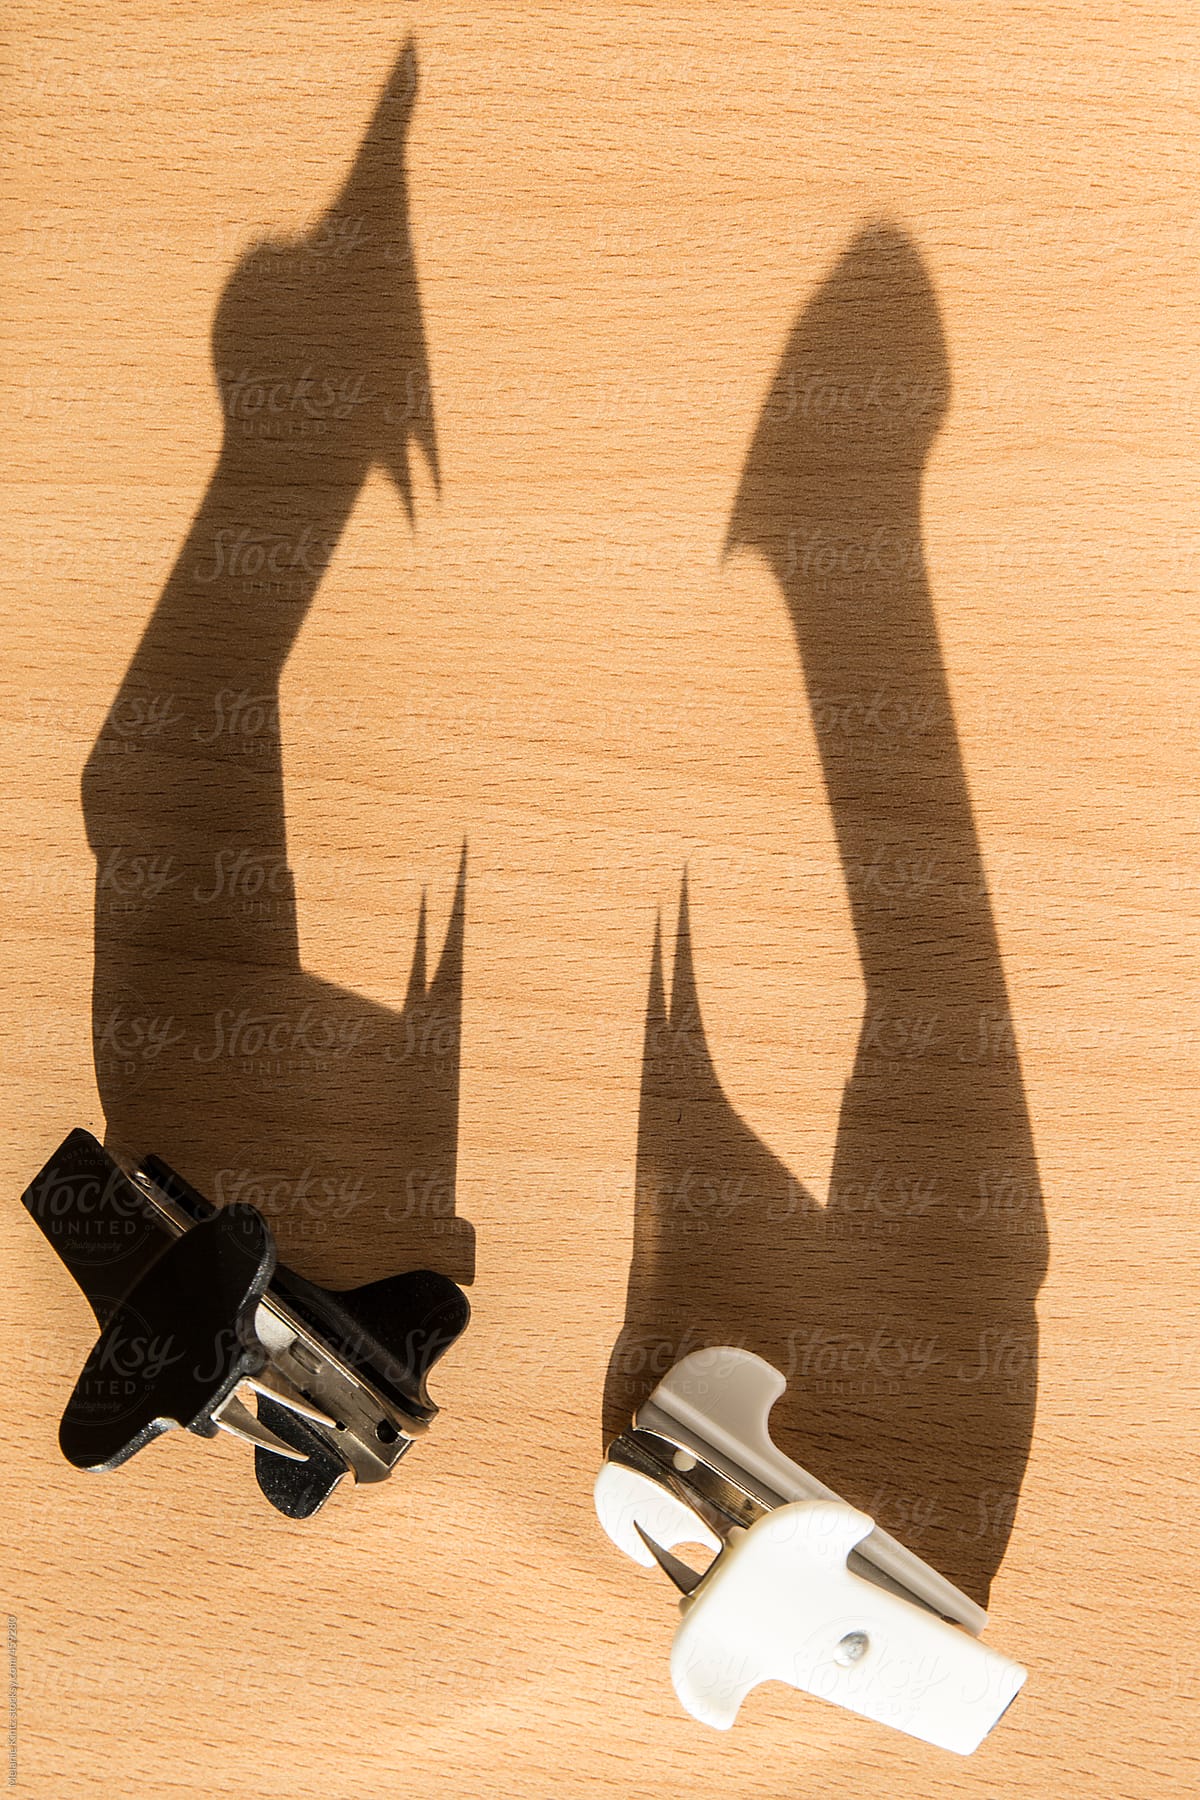 Two staple removers casting long shadows on a desk